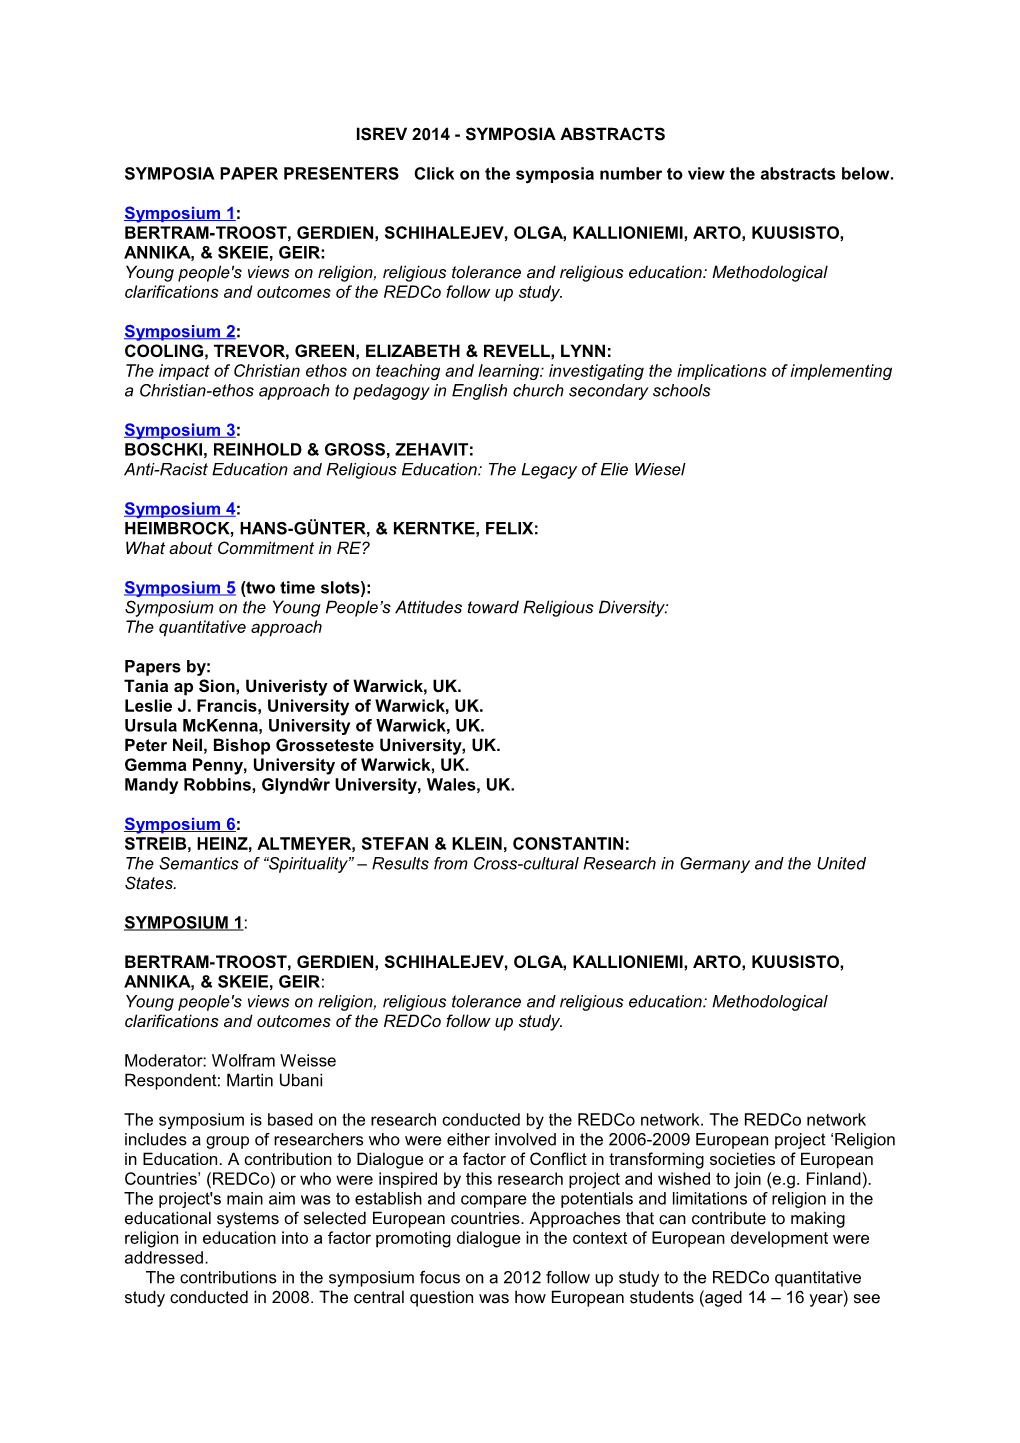 SYMPOSIA PAPER PRESENTERS Click on the Symposia Number to View the Abstracts Below